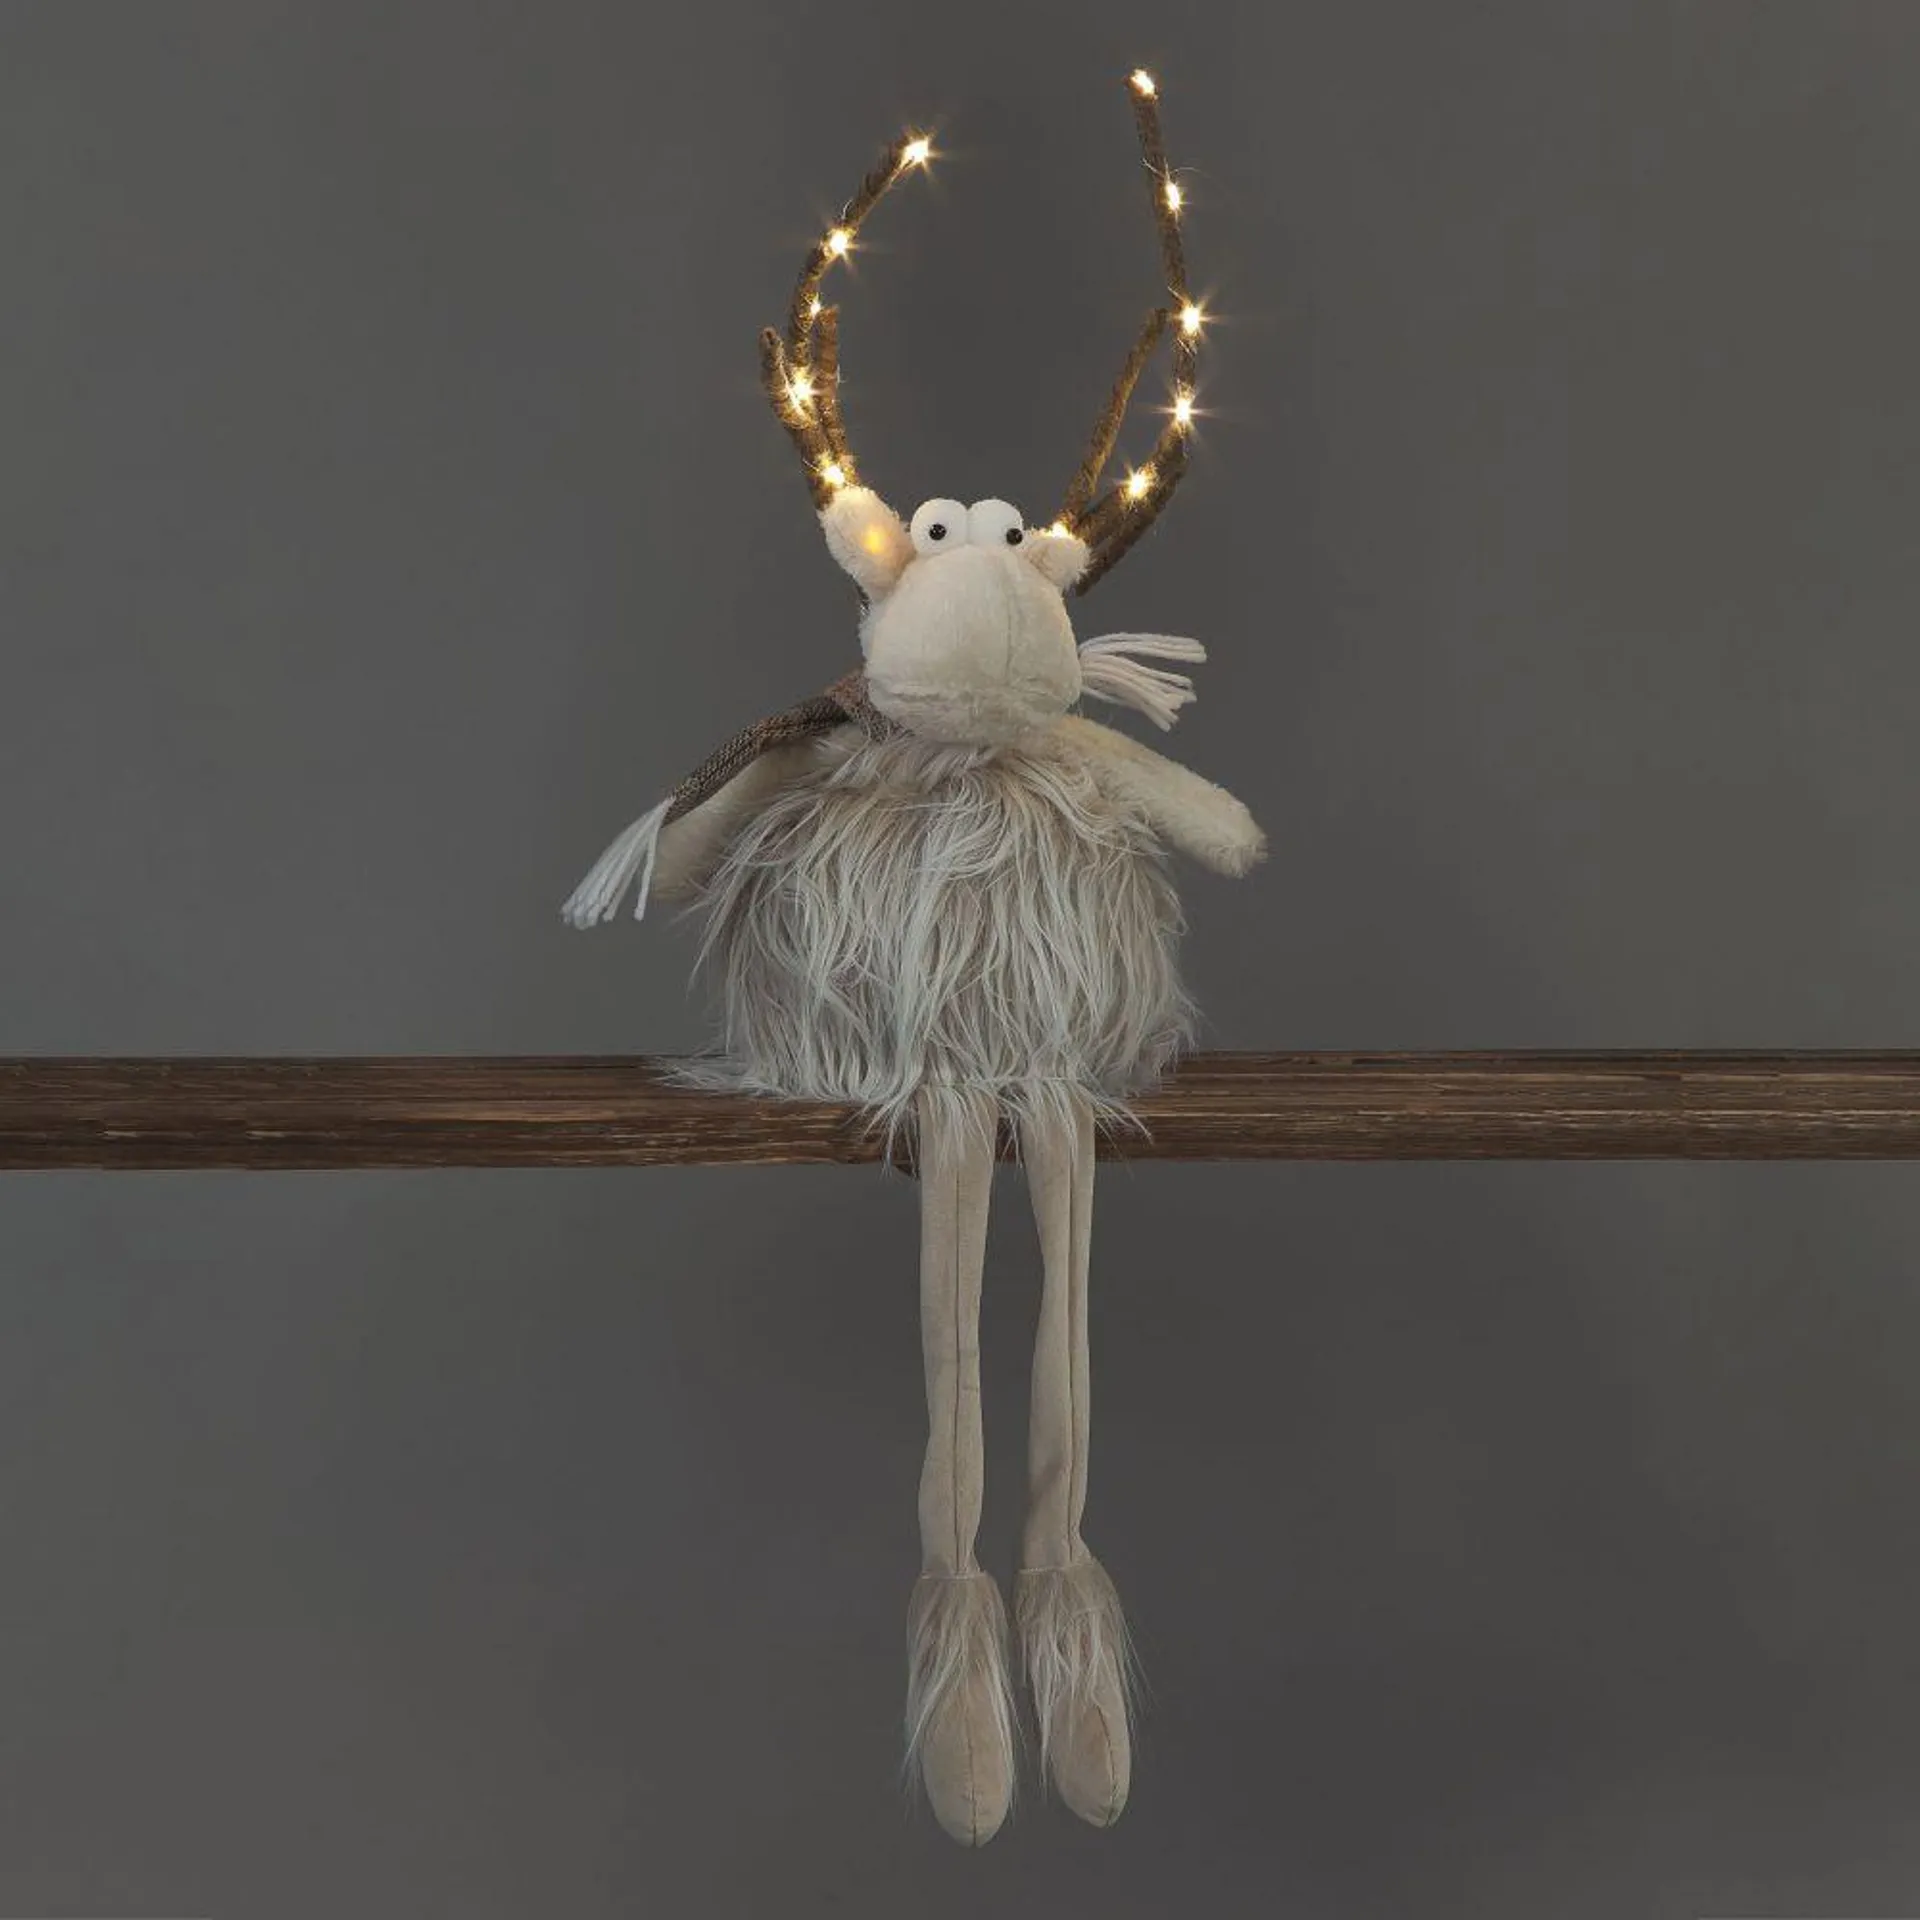 58cm sitting Reindeer Christmas decoration with light up antlers - Battery operated